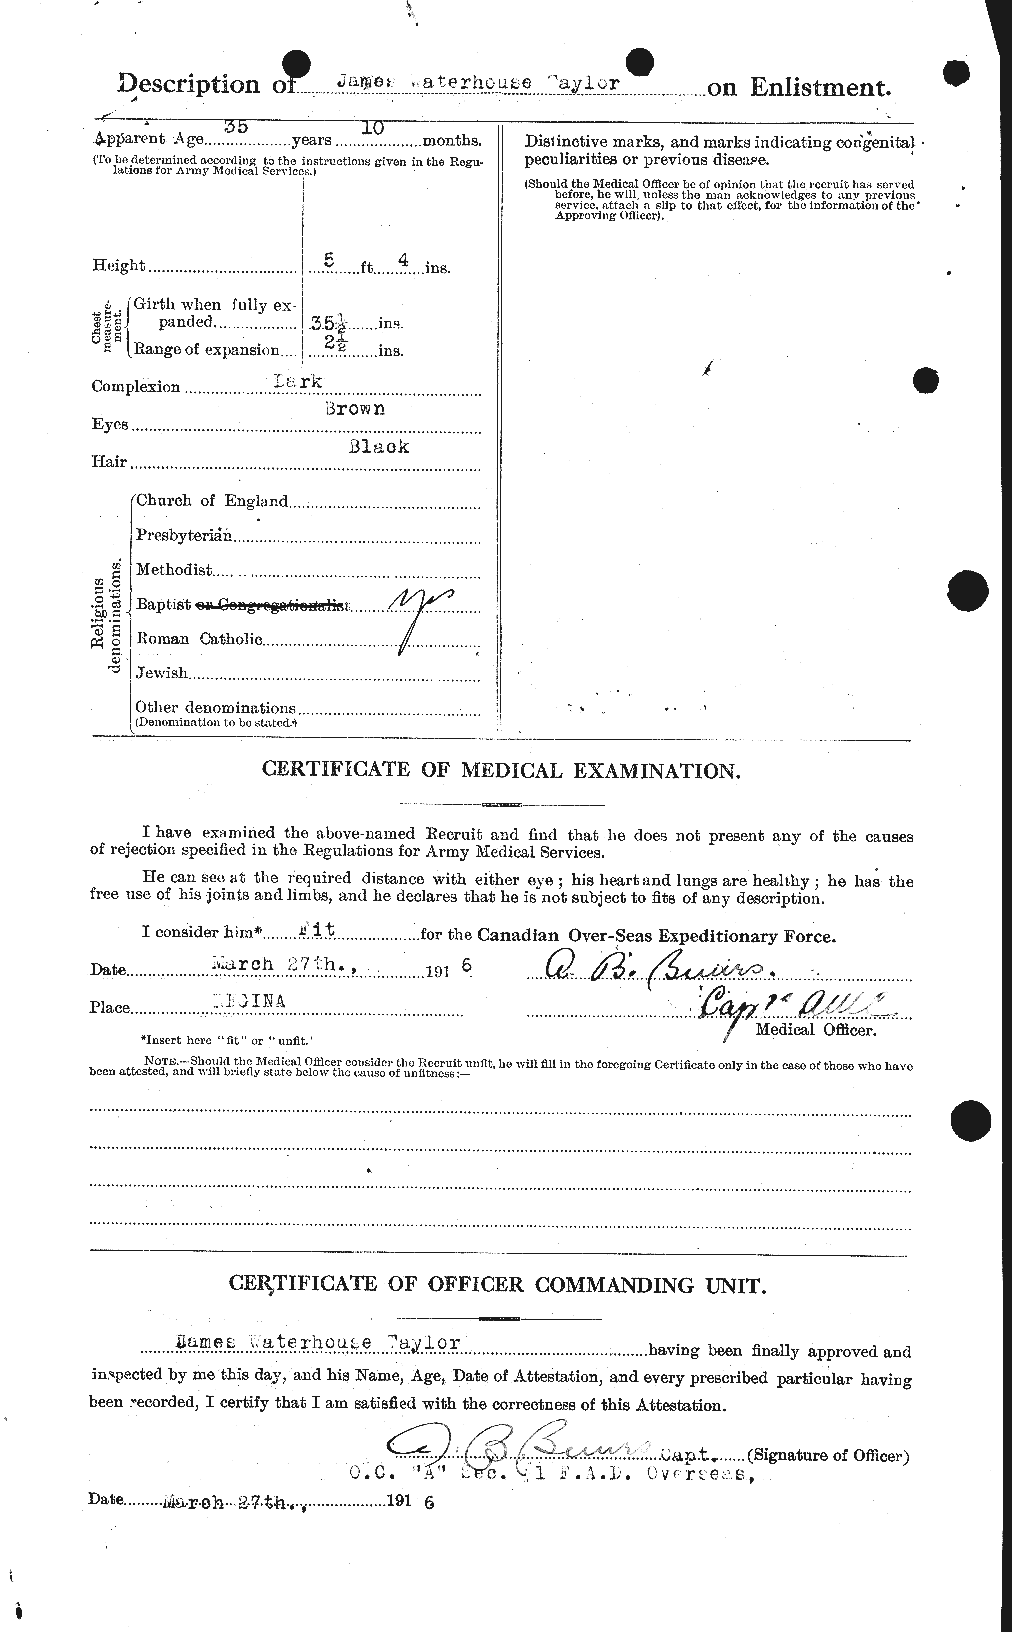 Personnel Records of the First World War - CEF 626963b